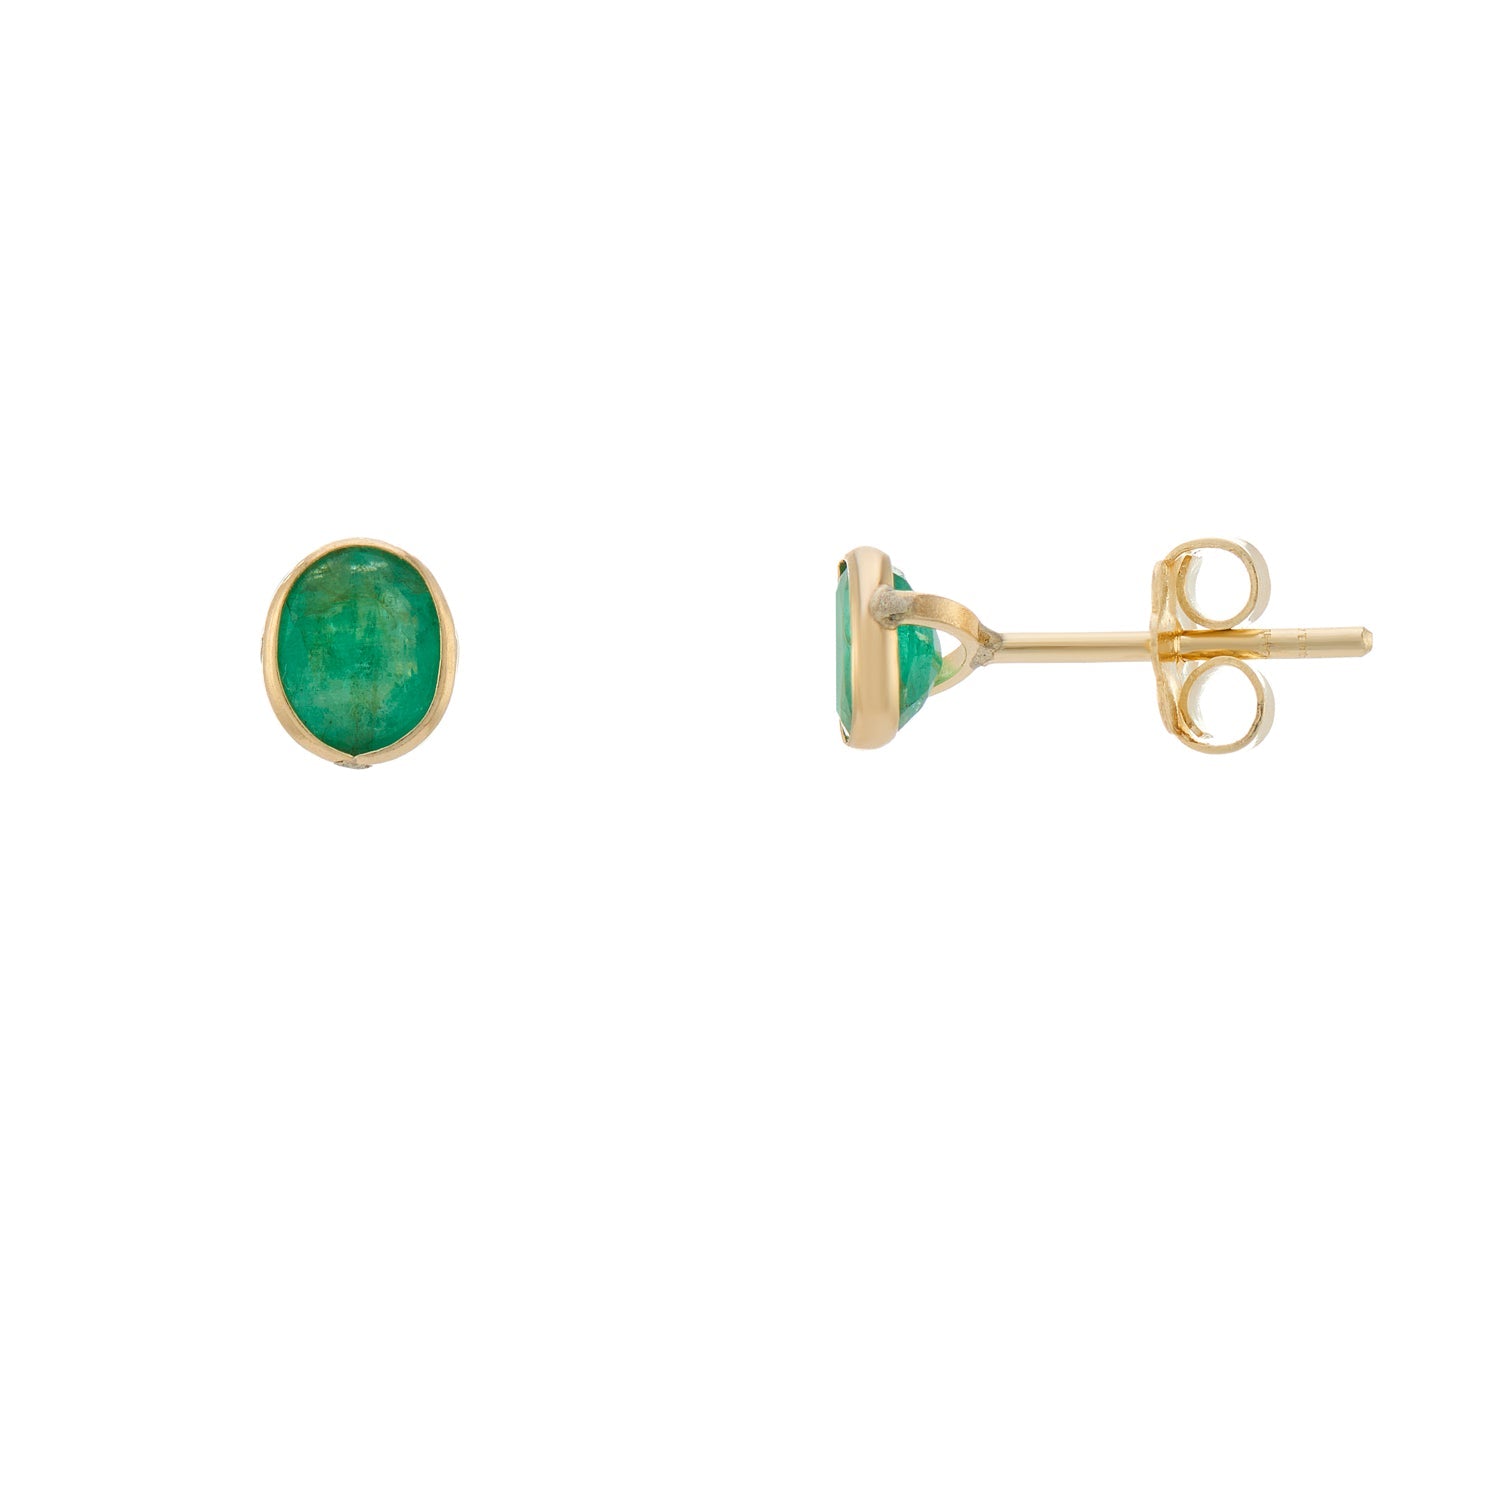 9ct gold 5x4mm rubover emerald studs